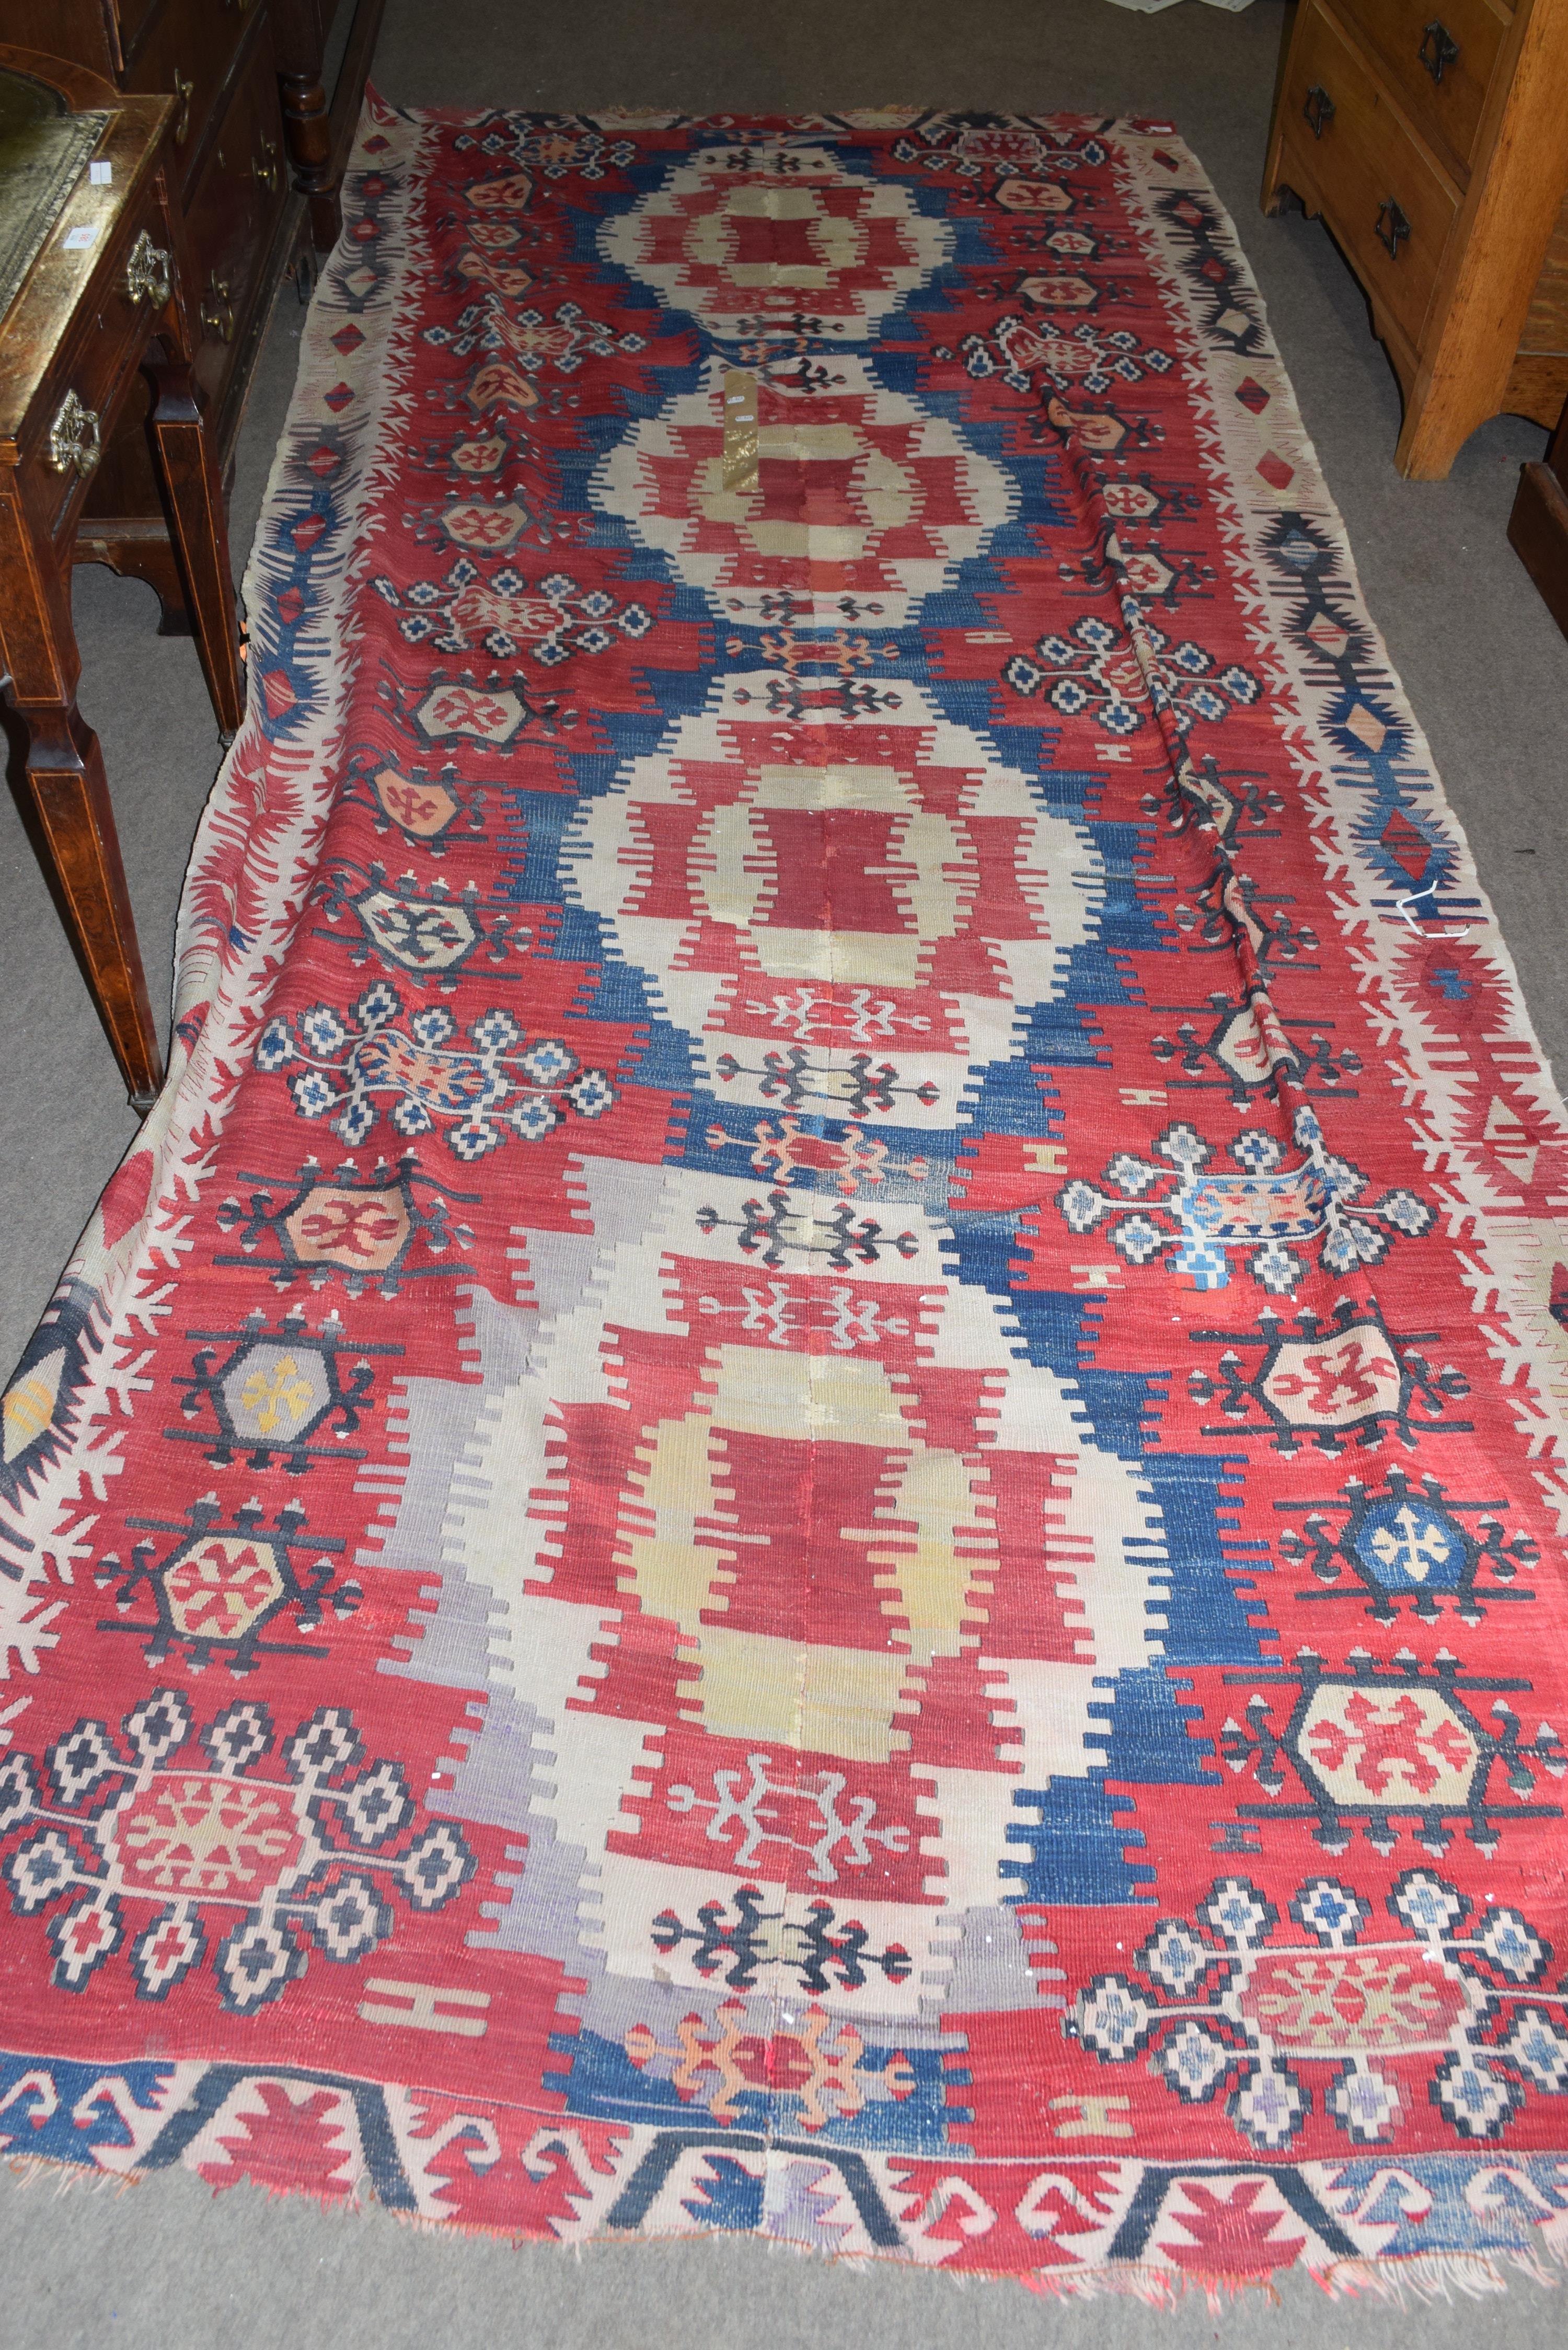 Modern Kilim in the Bor pattern, 355 x 152cm, originally purchased from The Kilim House, Fulham,